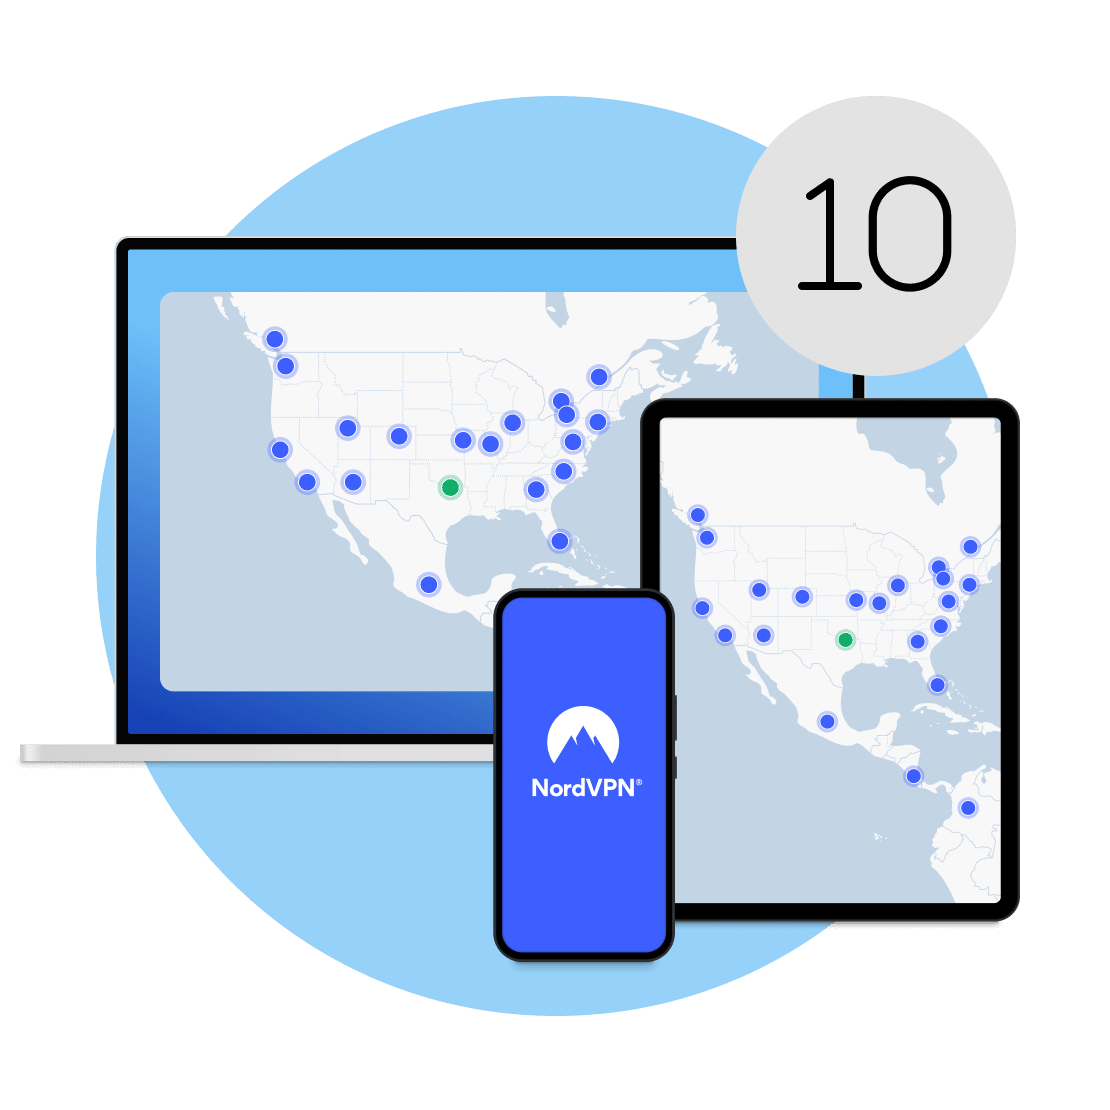 One NordVPN subscription secures ten devices simultaneously.